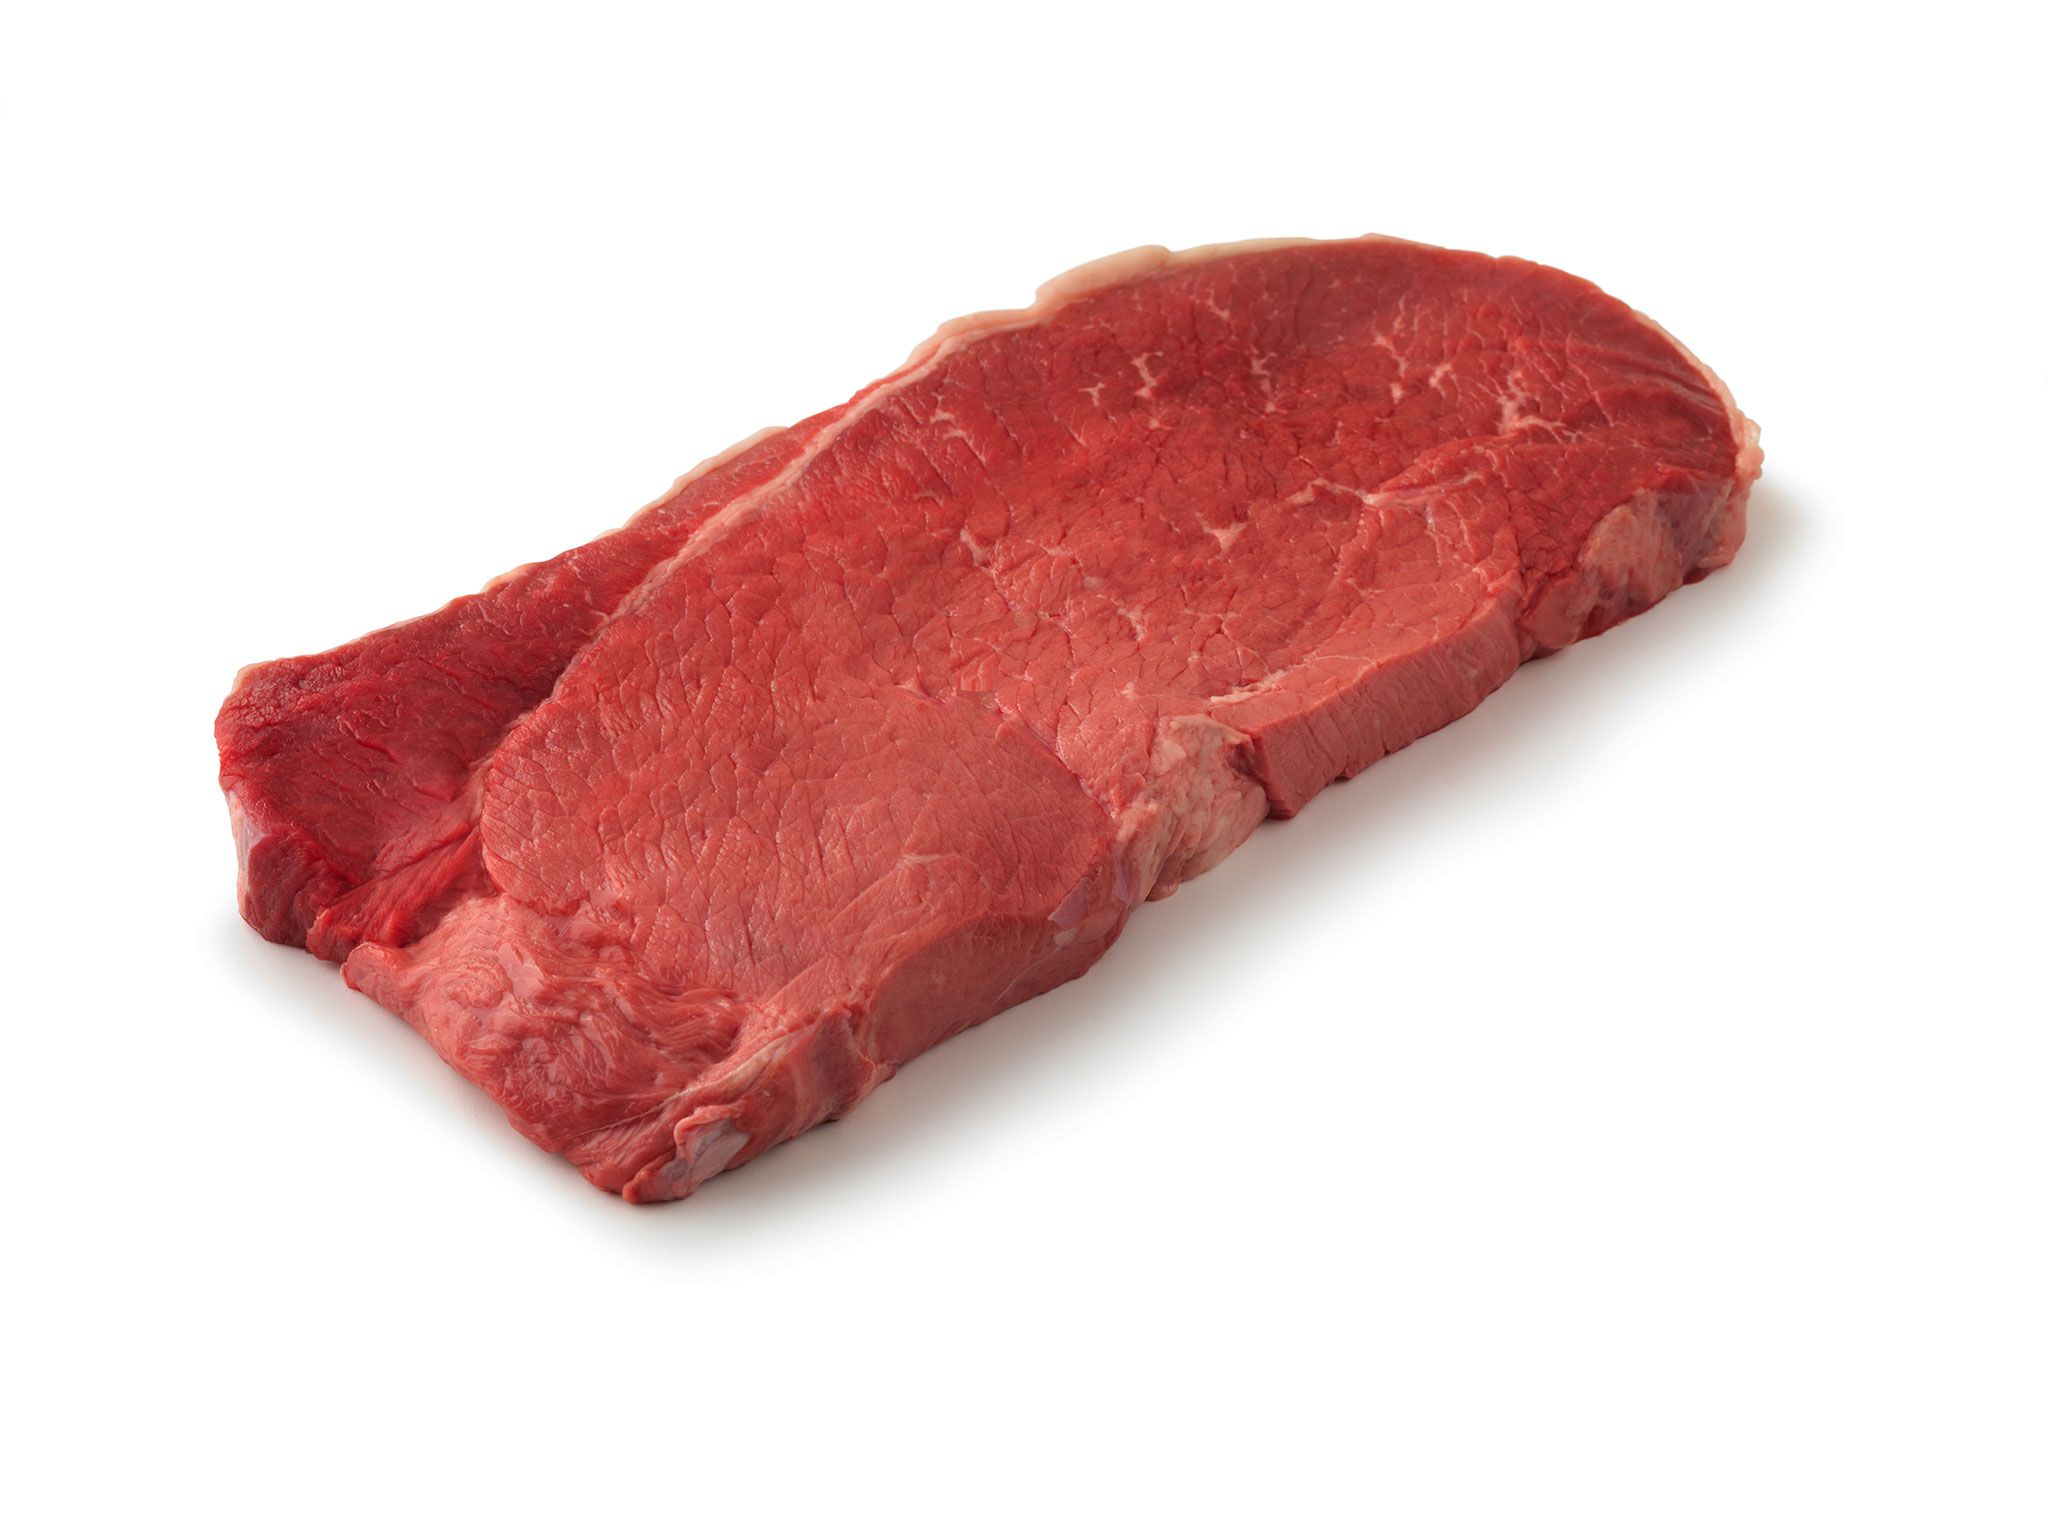 Stretch Your Food Dollar with Inexpensive Cuts of Meat